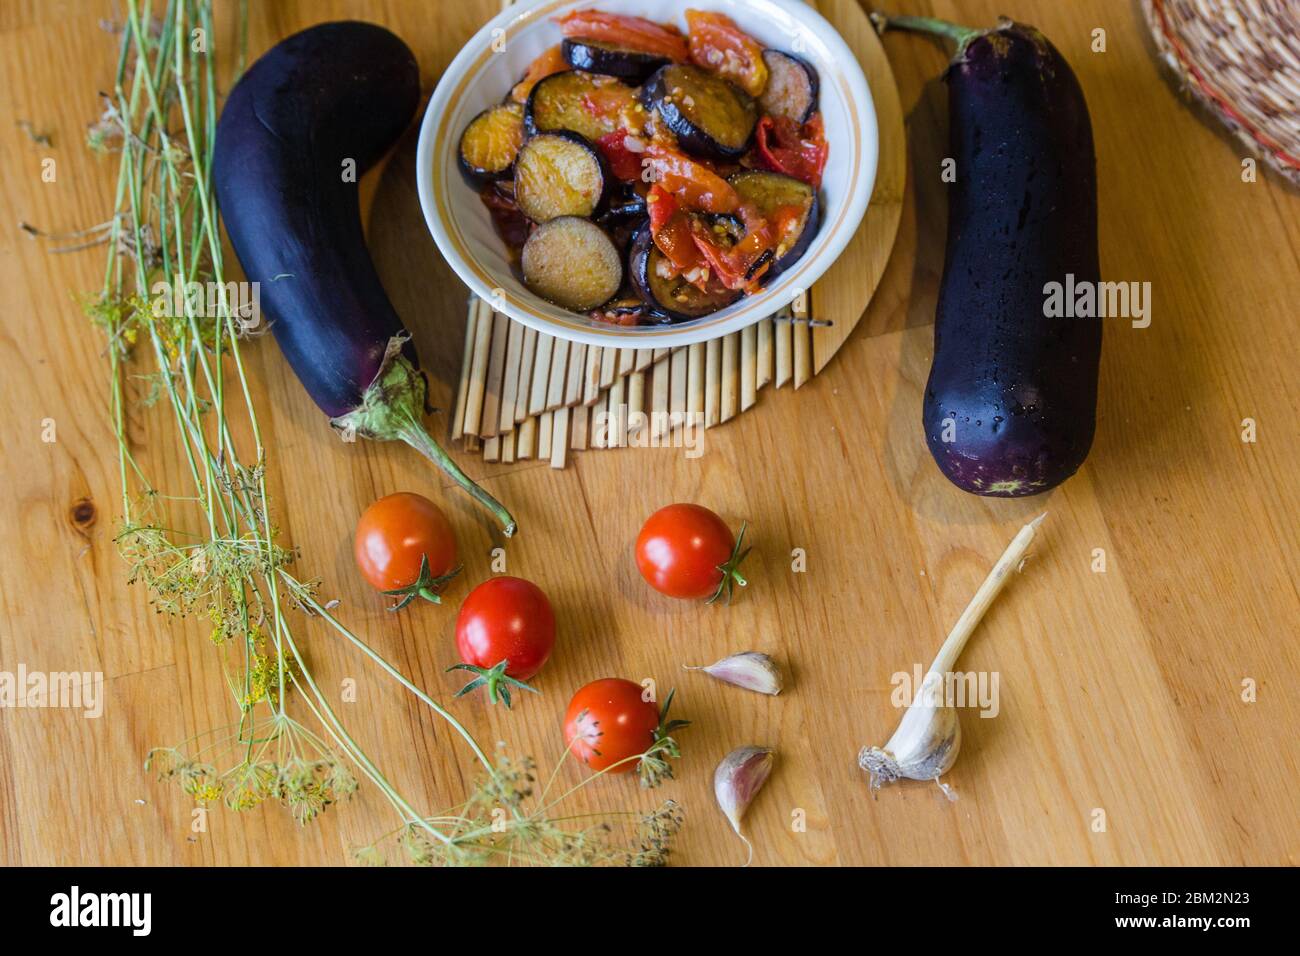 Homemade vegetable stew lecho with tomatoes and eggplants flatlay background on wooden table Stock Photo